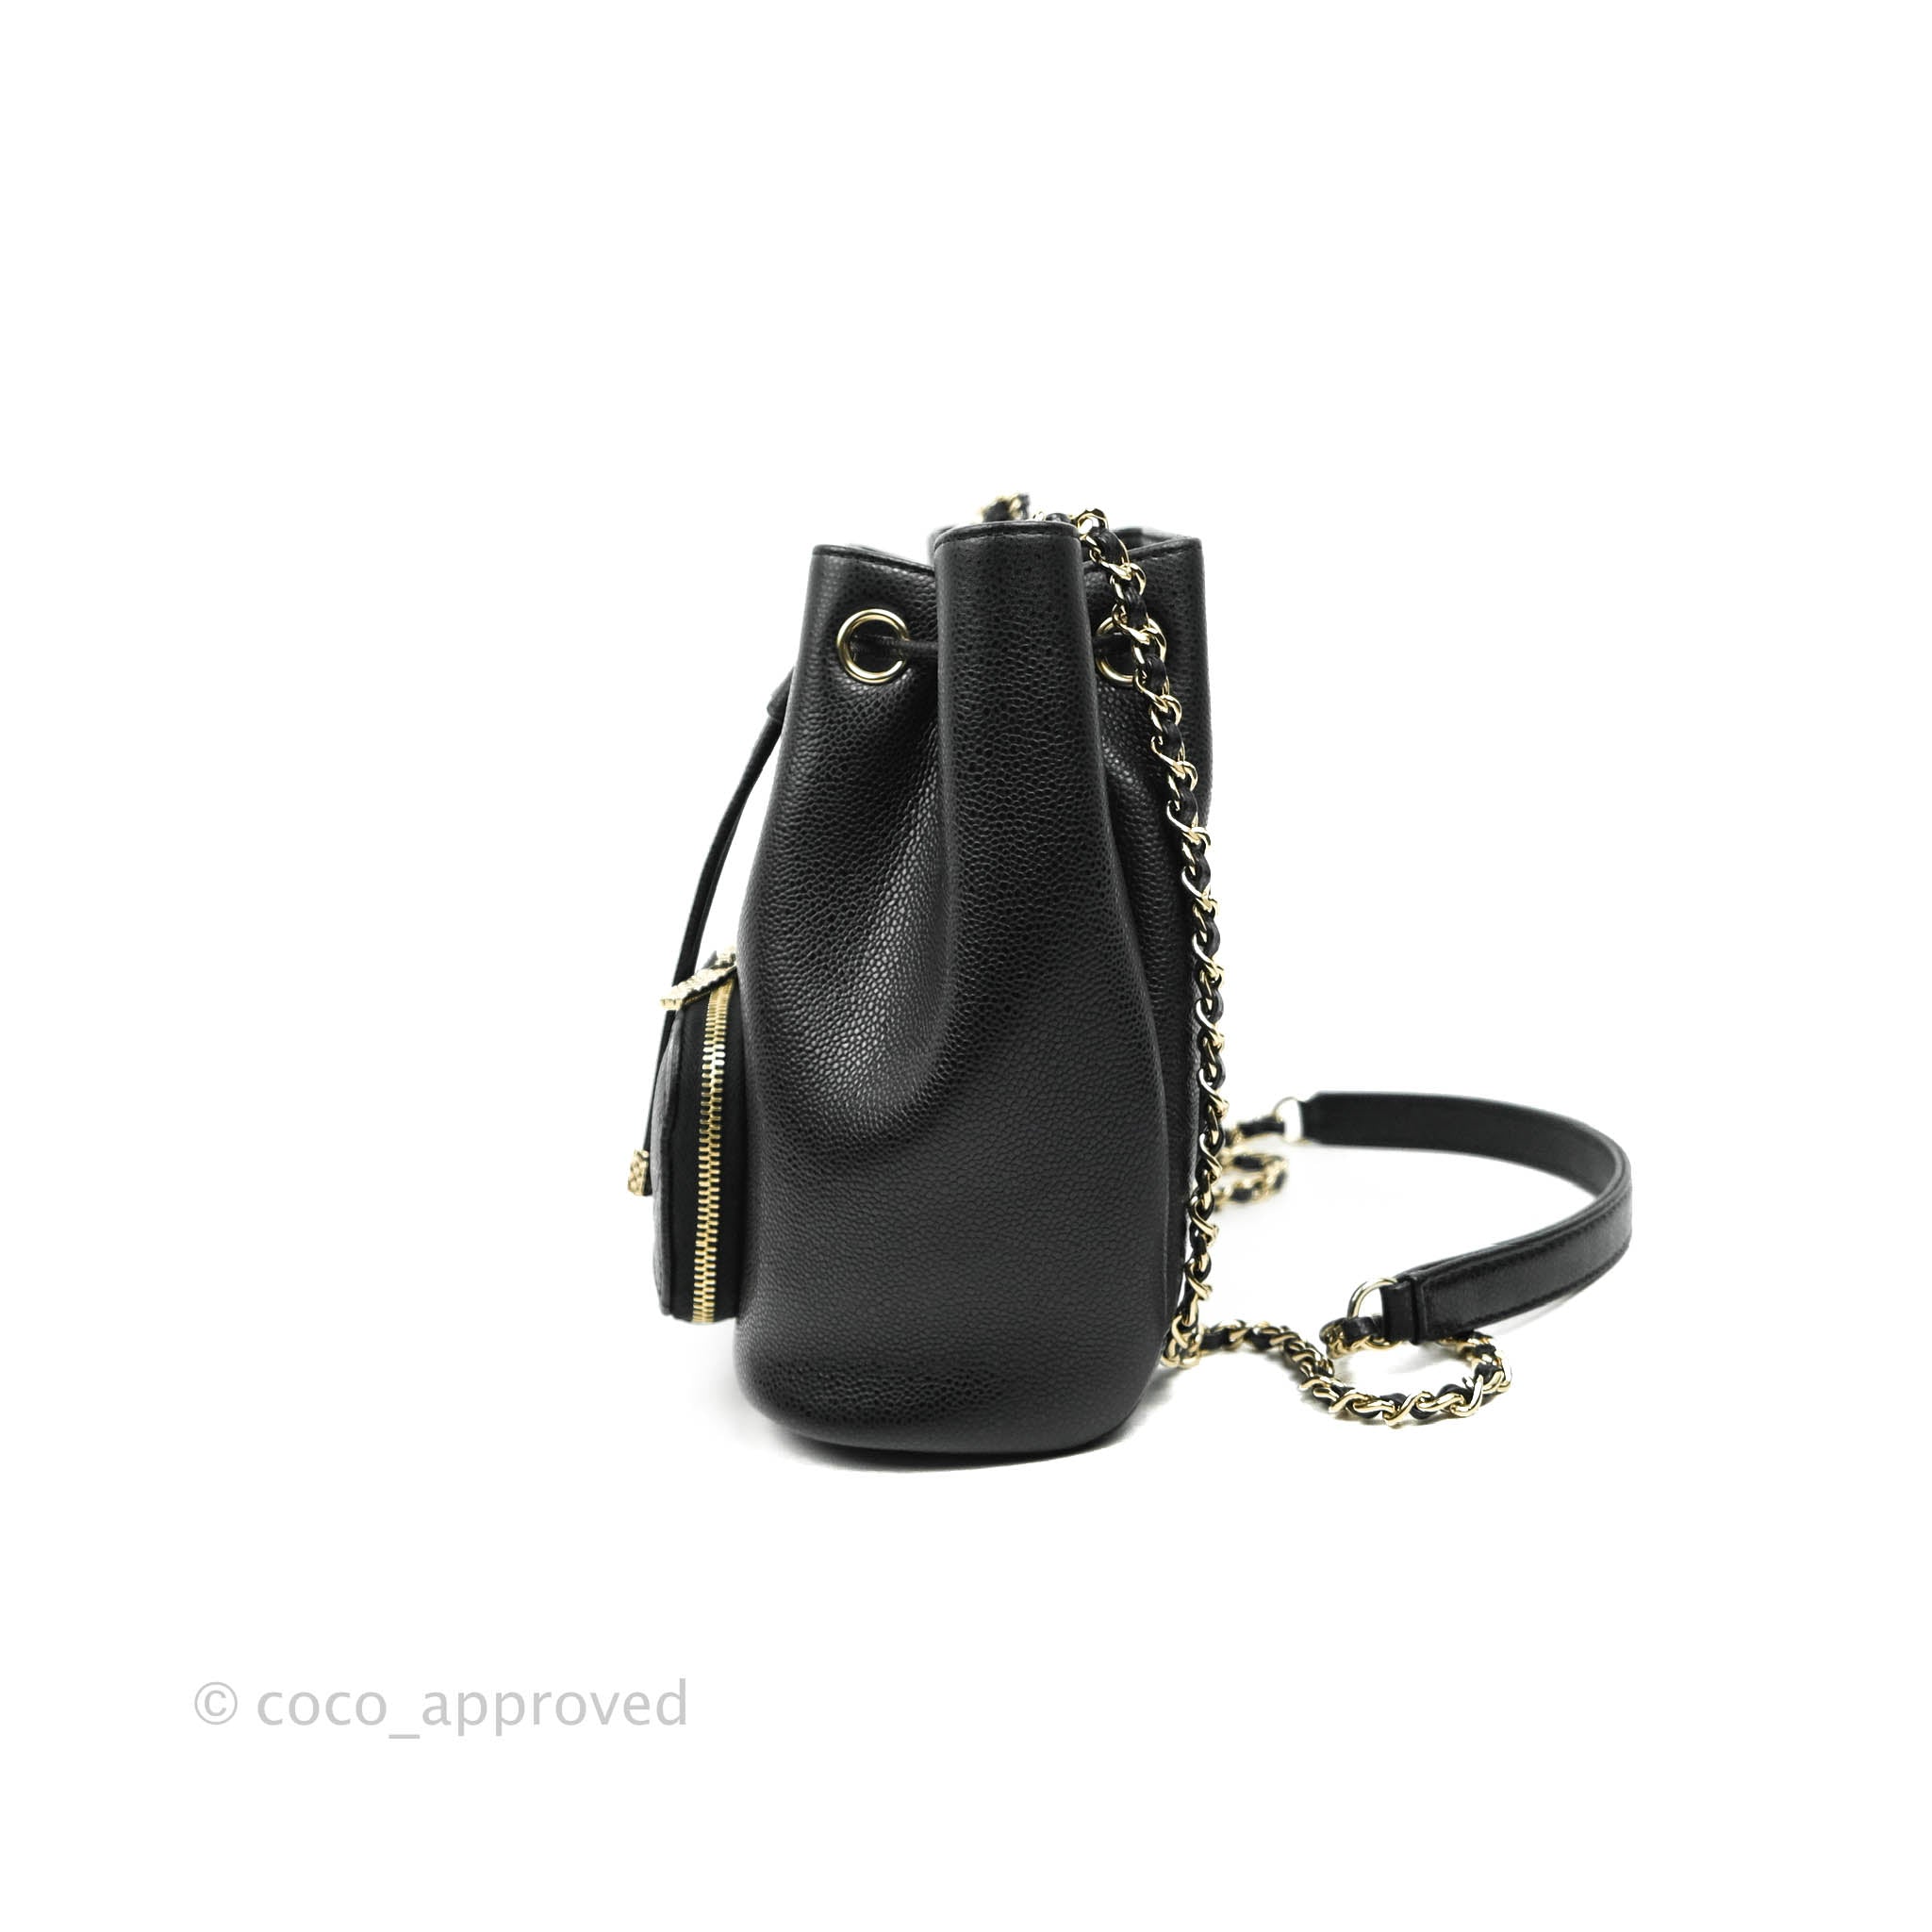 Chanel DRAWSTRING bucket bags comparisons with reviews and prices